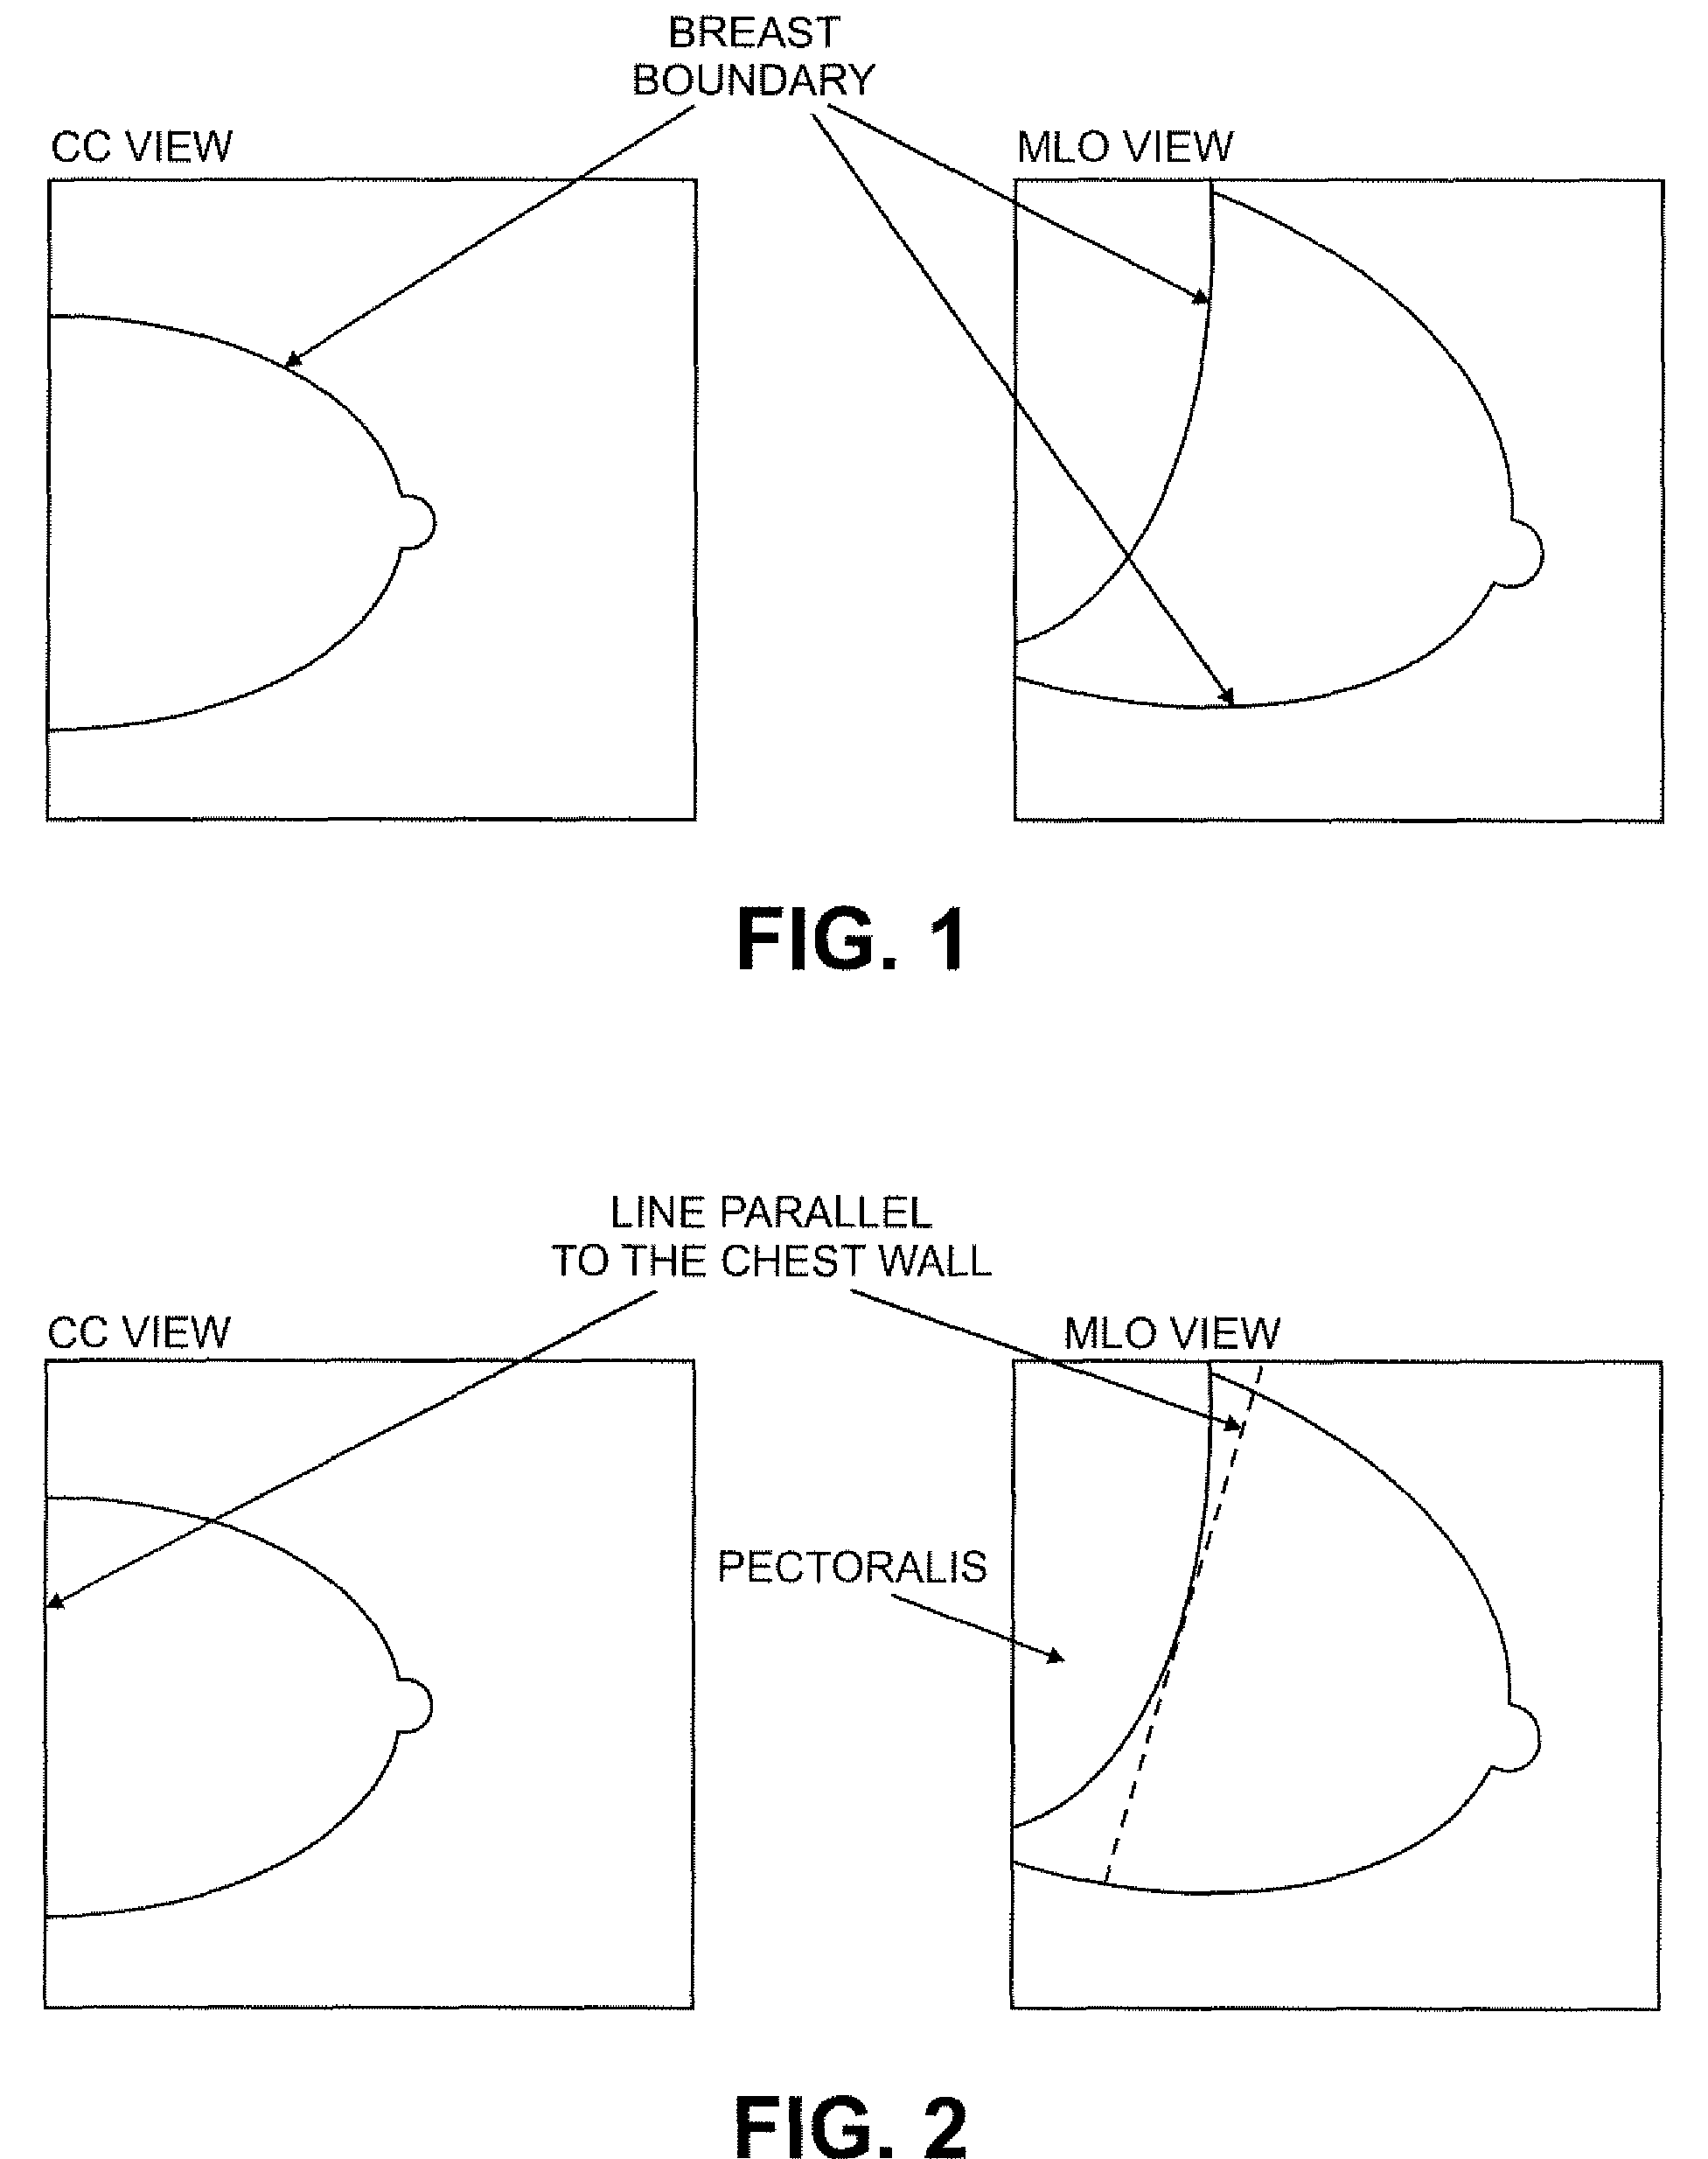 Methods and apparatus for computer automated diagnosis of mammogram images